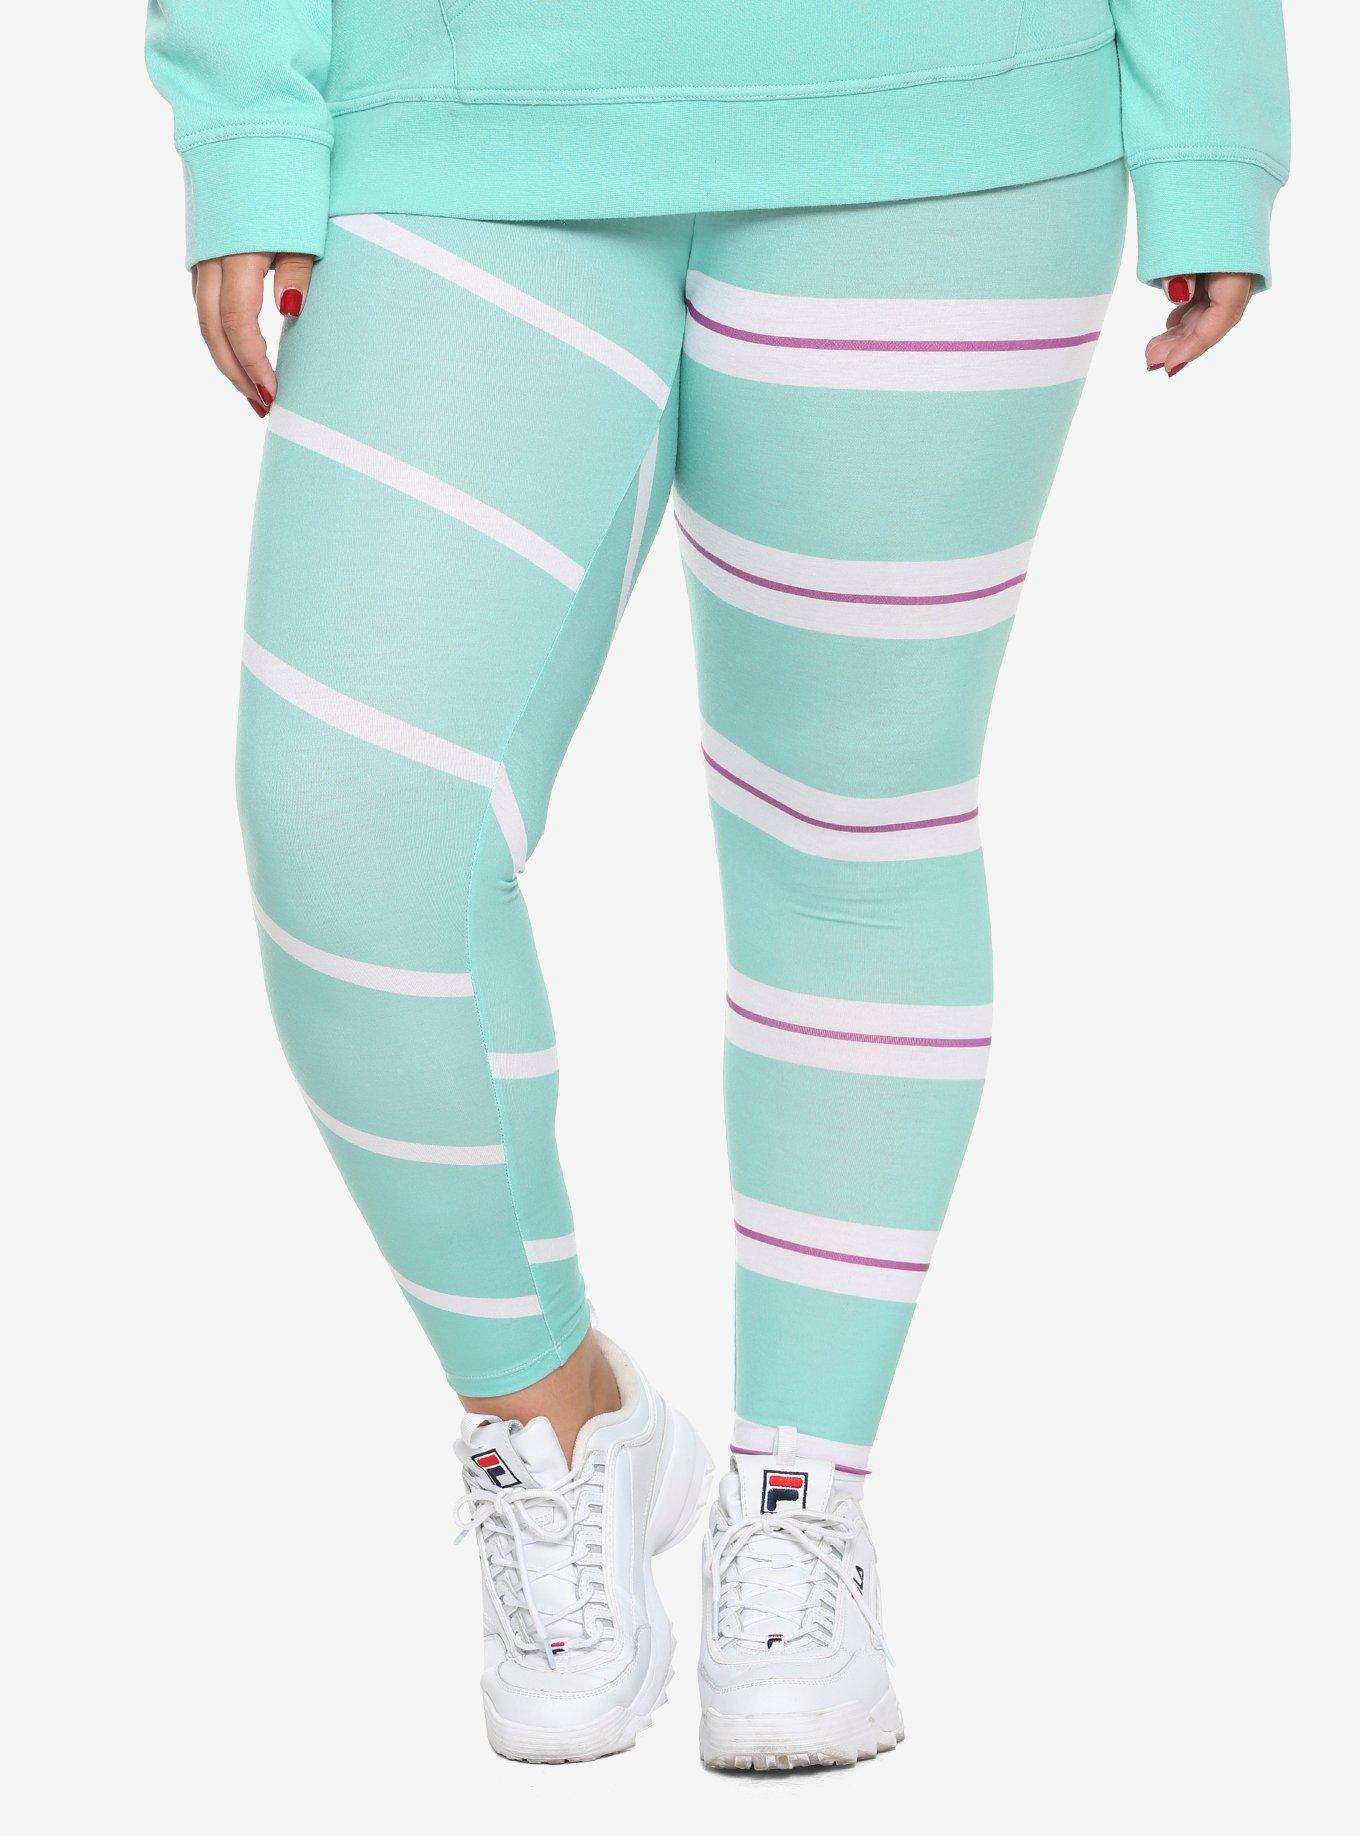 Vanellope Inspired Leggings -   Leggings are not pants, Disneybound,  Print clothes